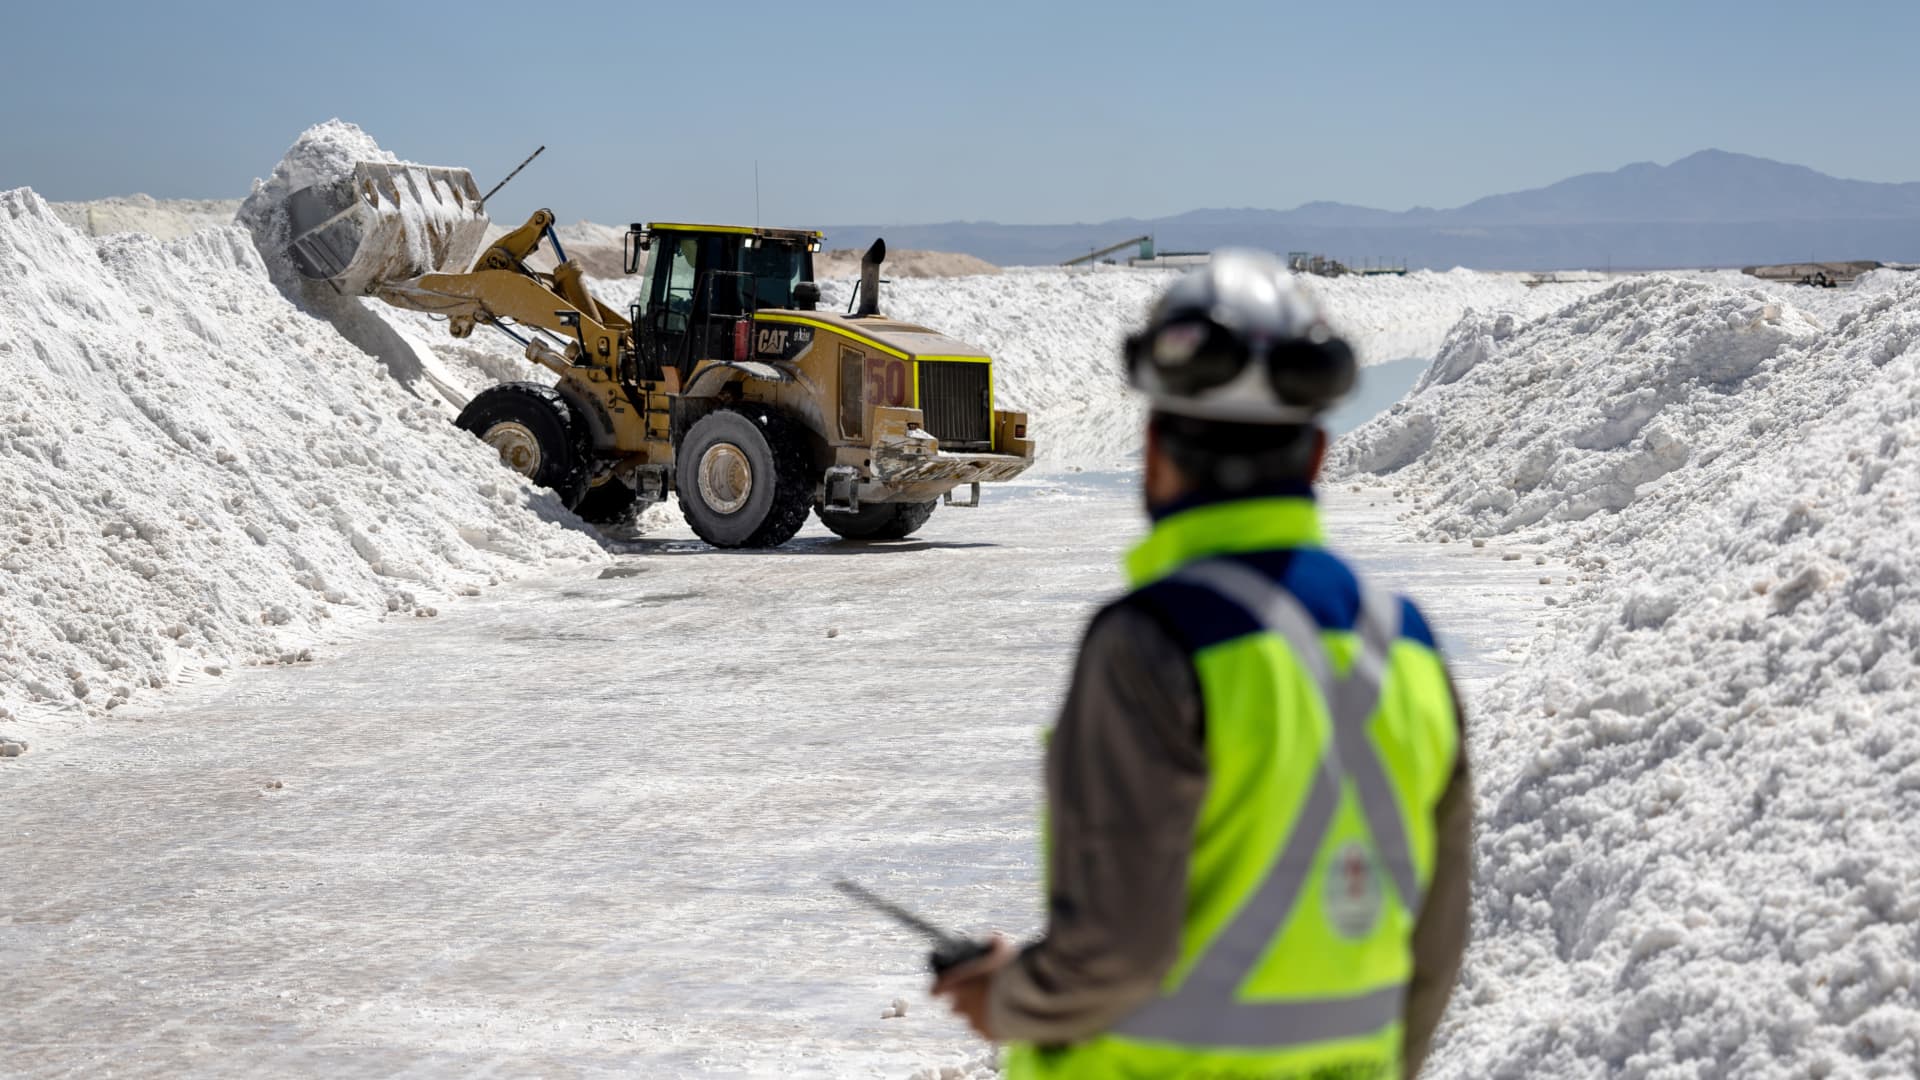 Demand for lithium and other critical minerals is skyrocketing, IEA says, but concerns over supply linger